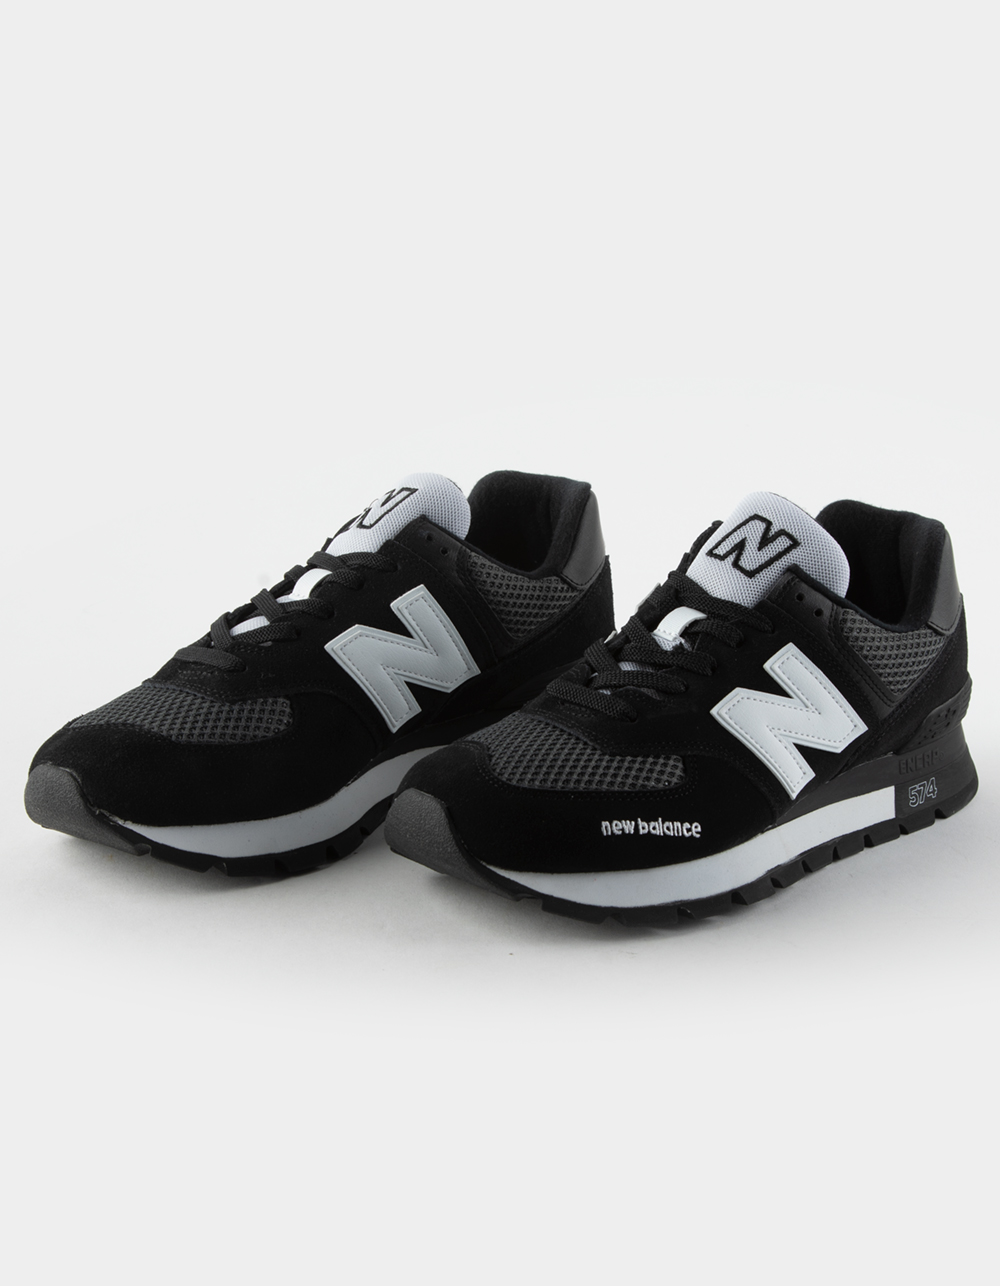 NEW BALANCE 574 Rugged Shoes | Tillys